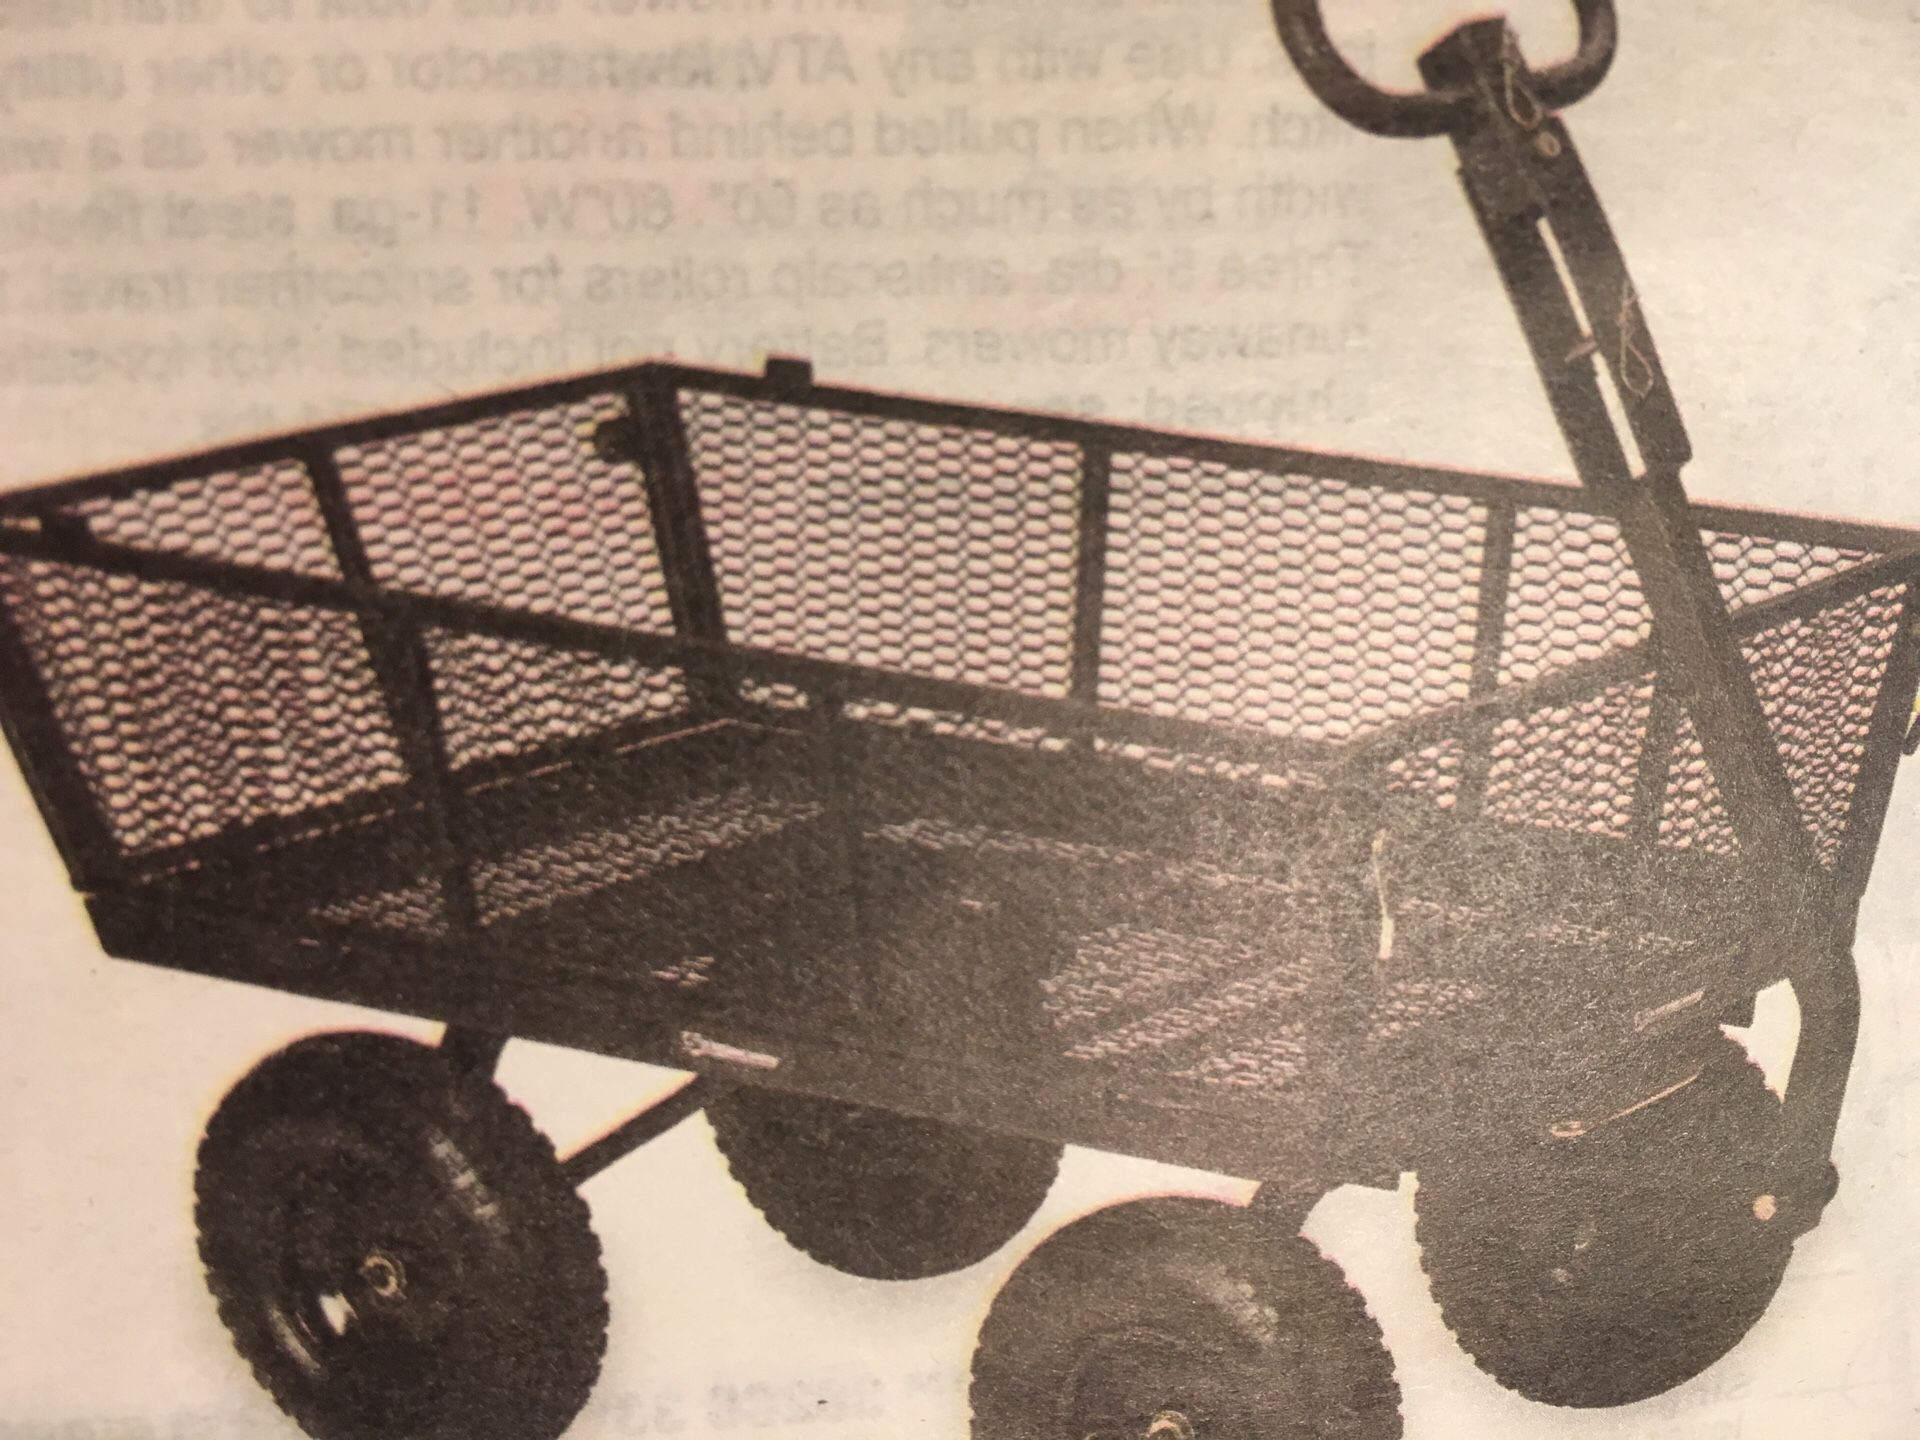 Utility cart 38” long and 20wide